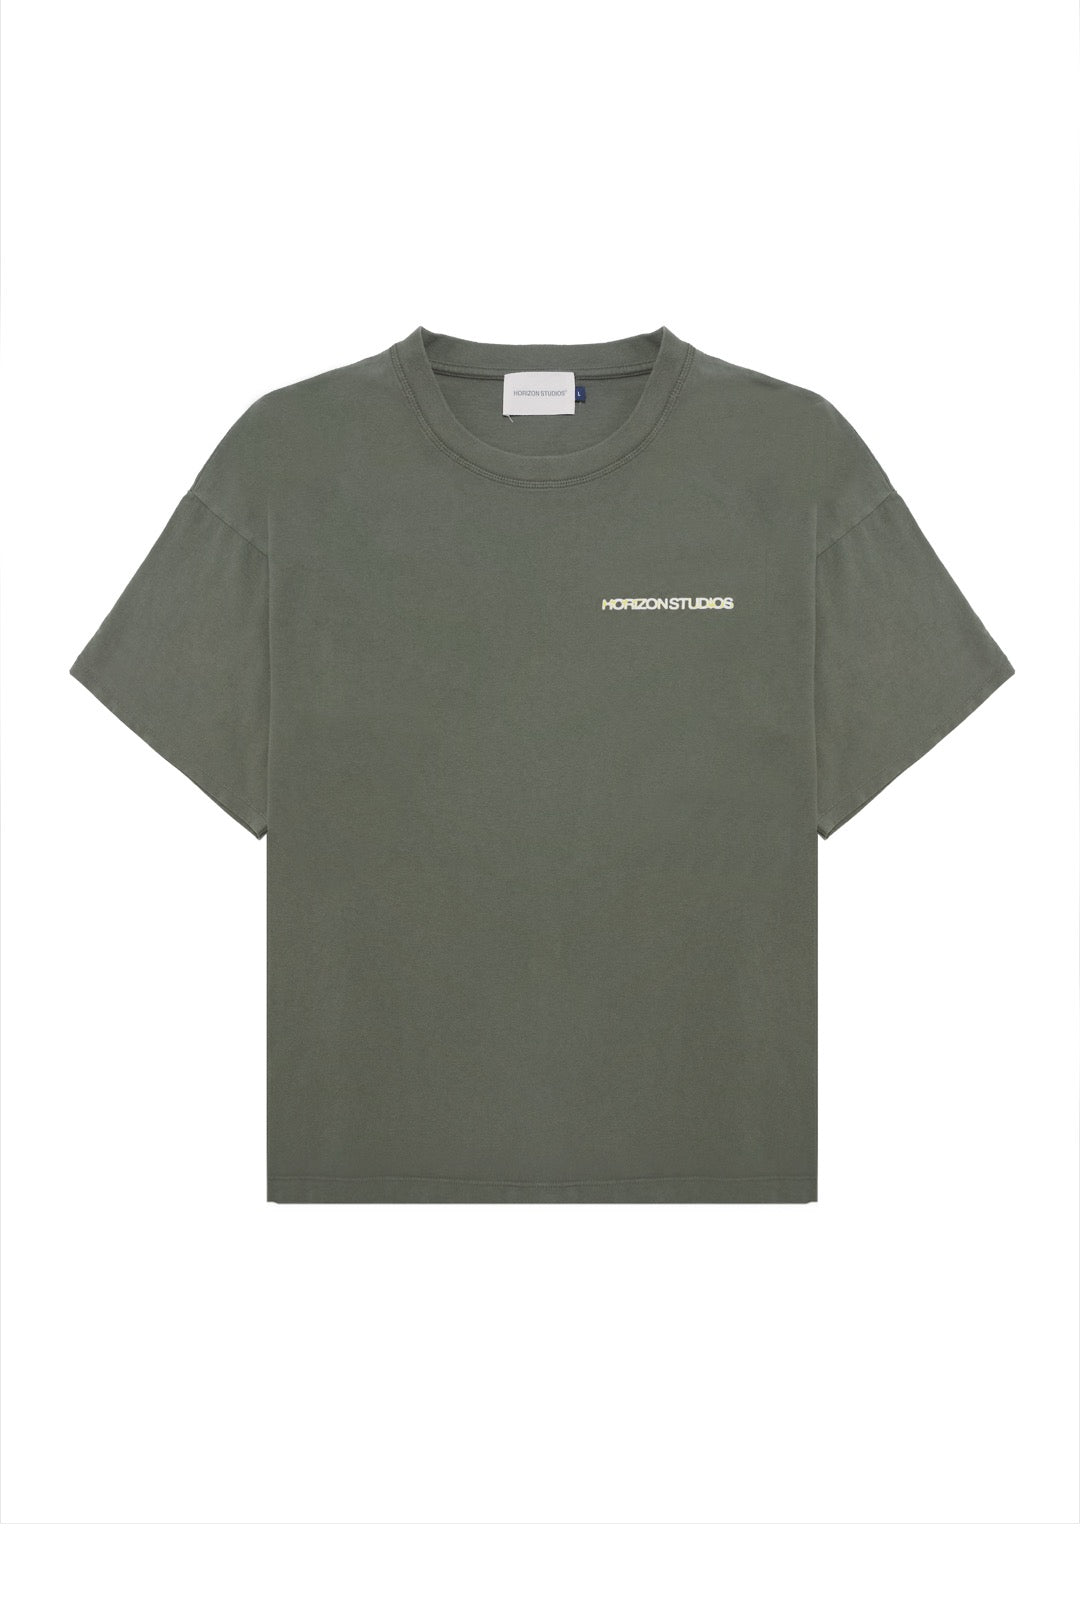 SAGE GREEN "OUR WORLD" T-SHIRT